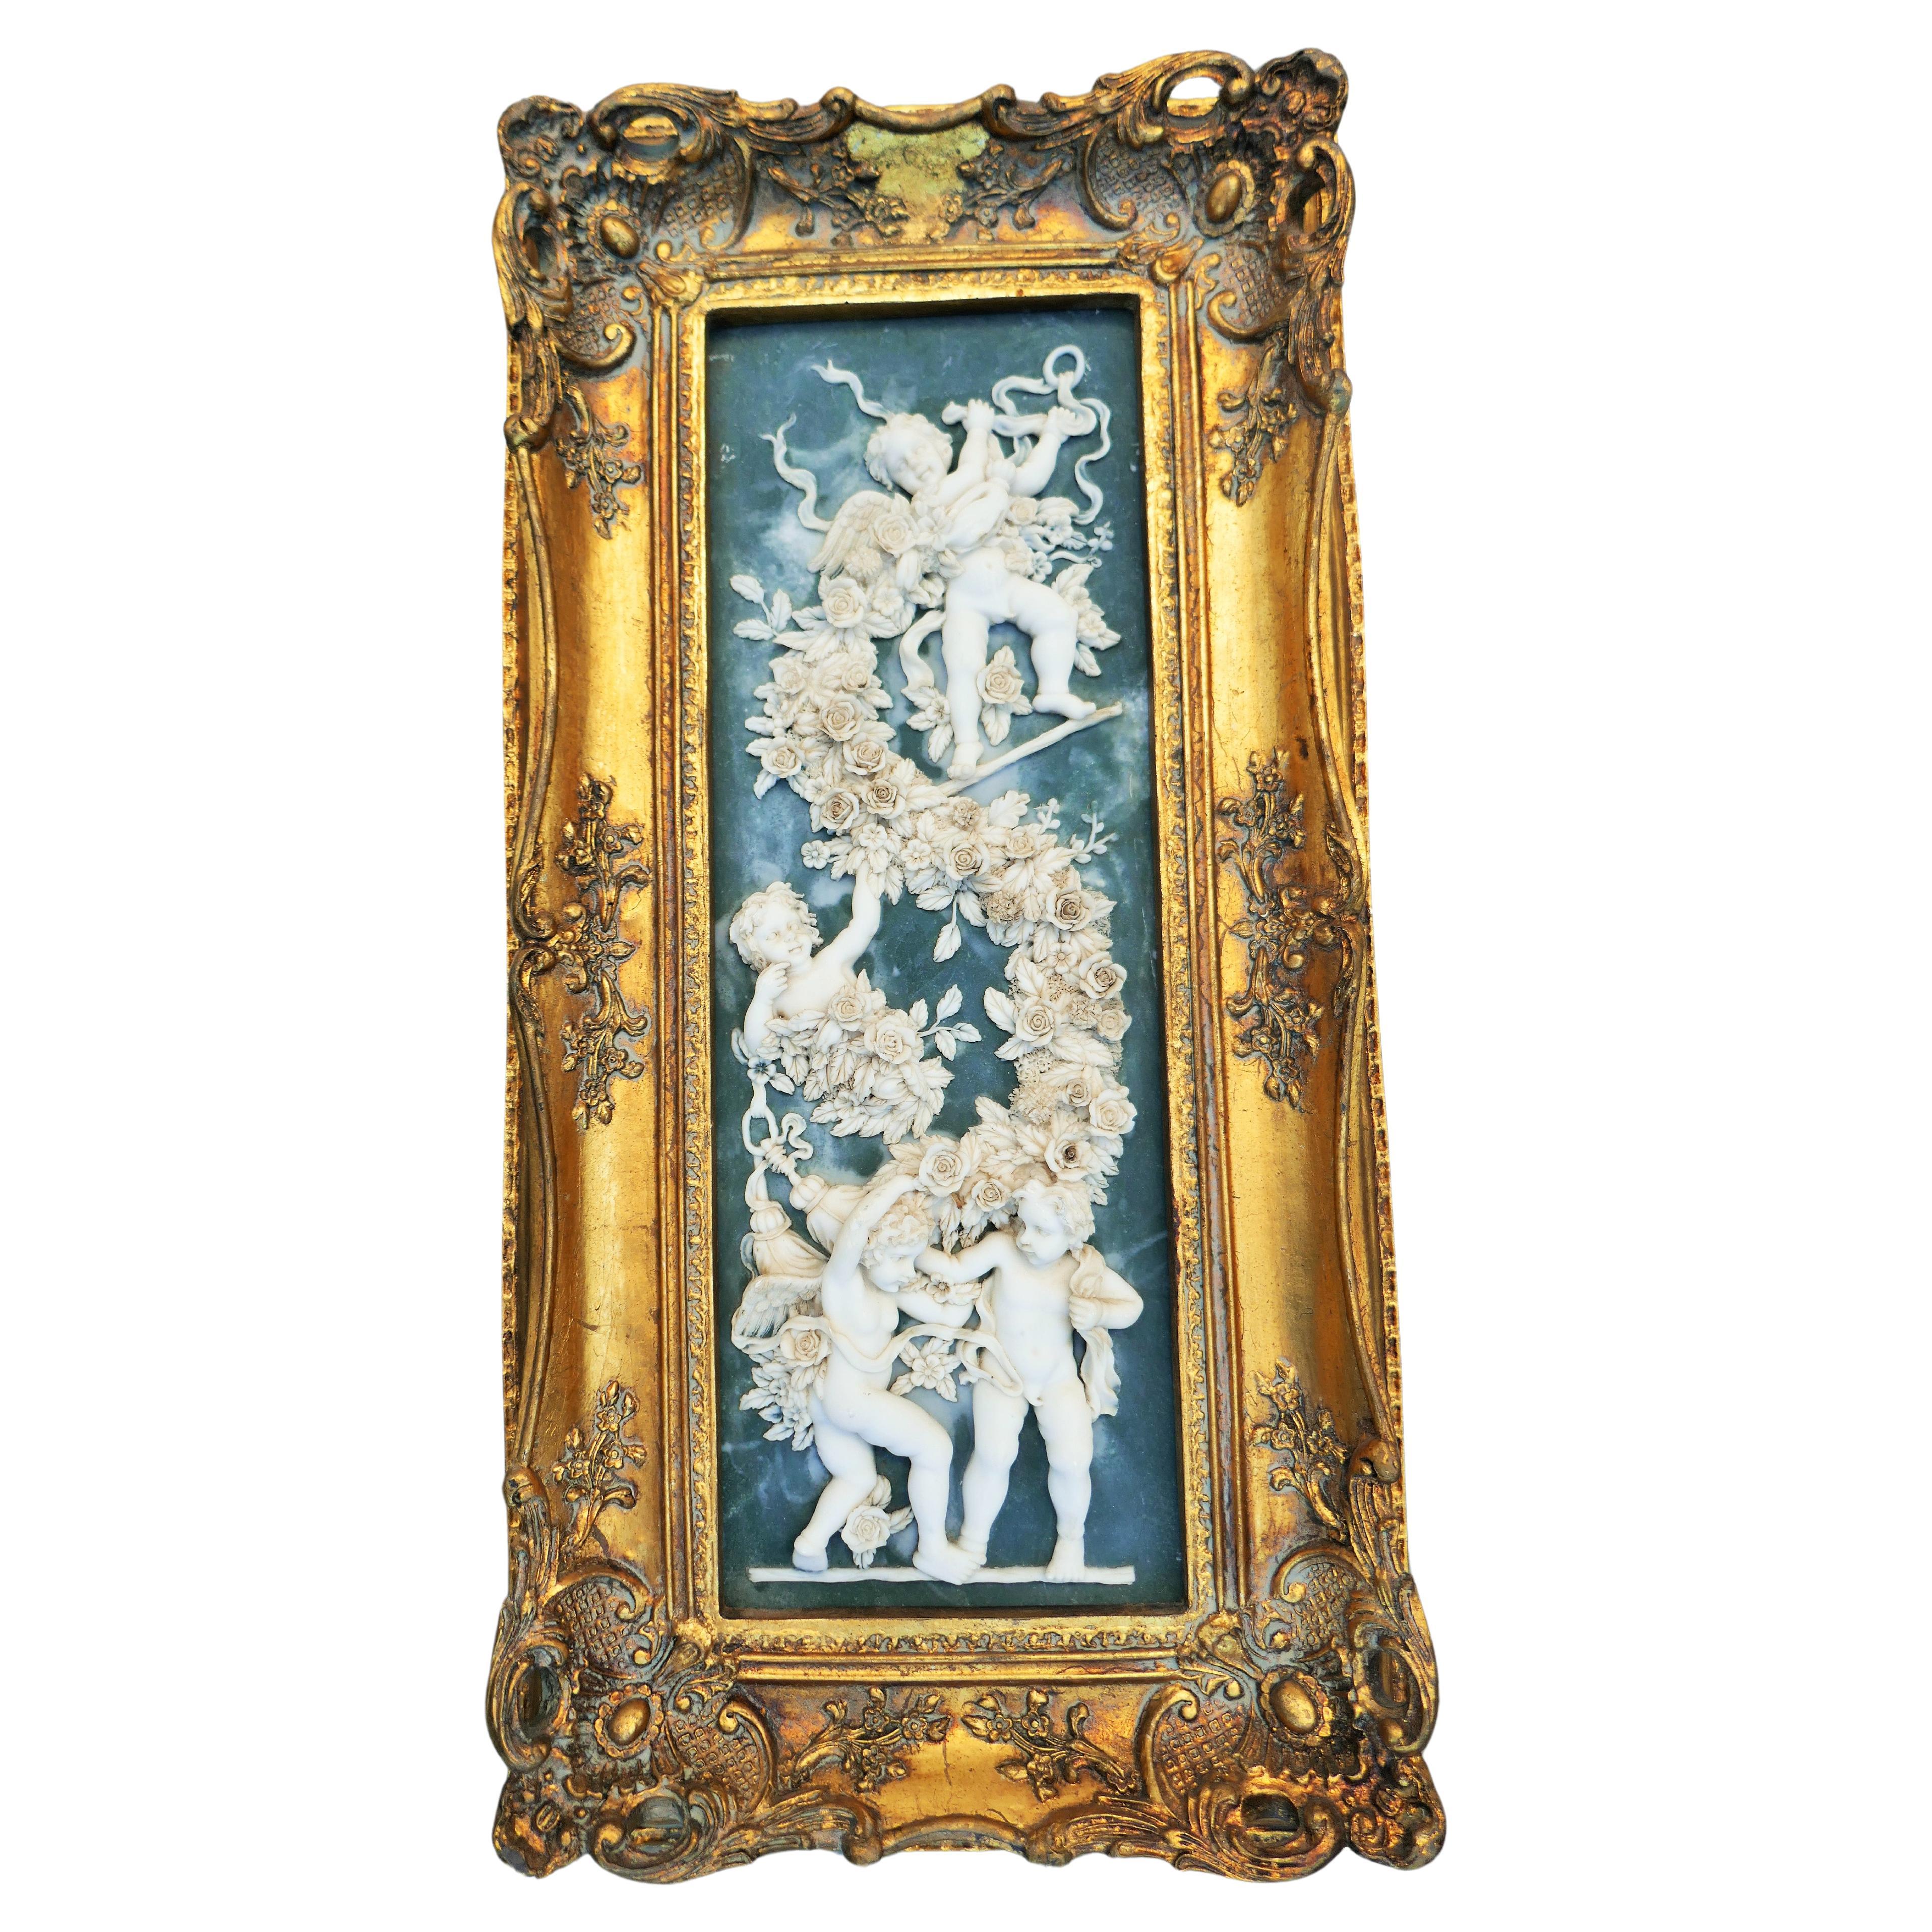 Marble powder bas-relief on wooden frame